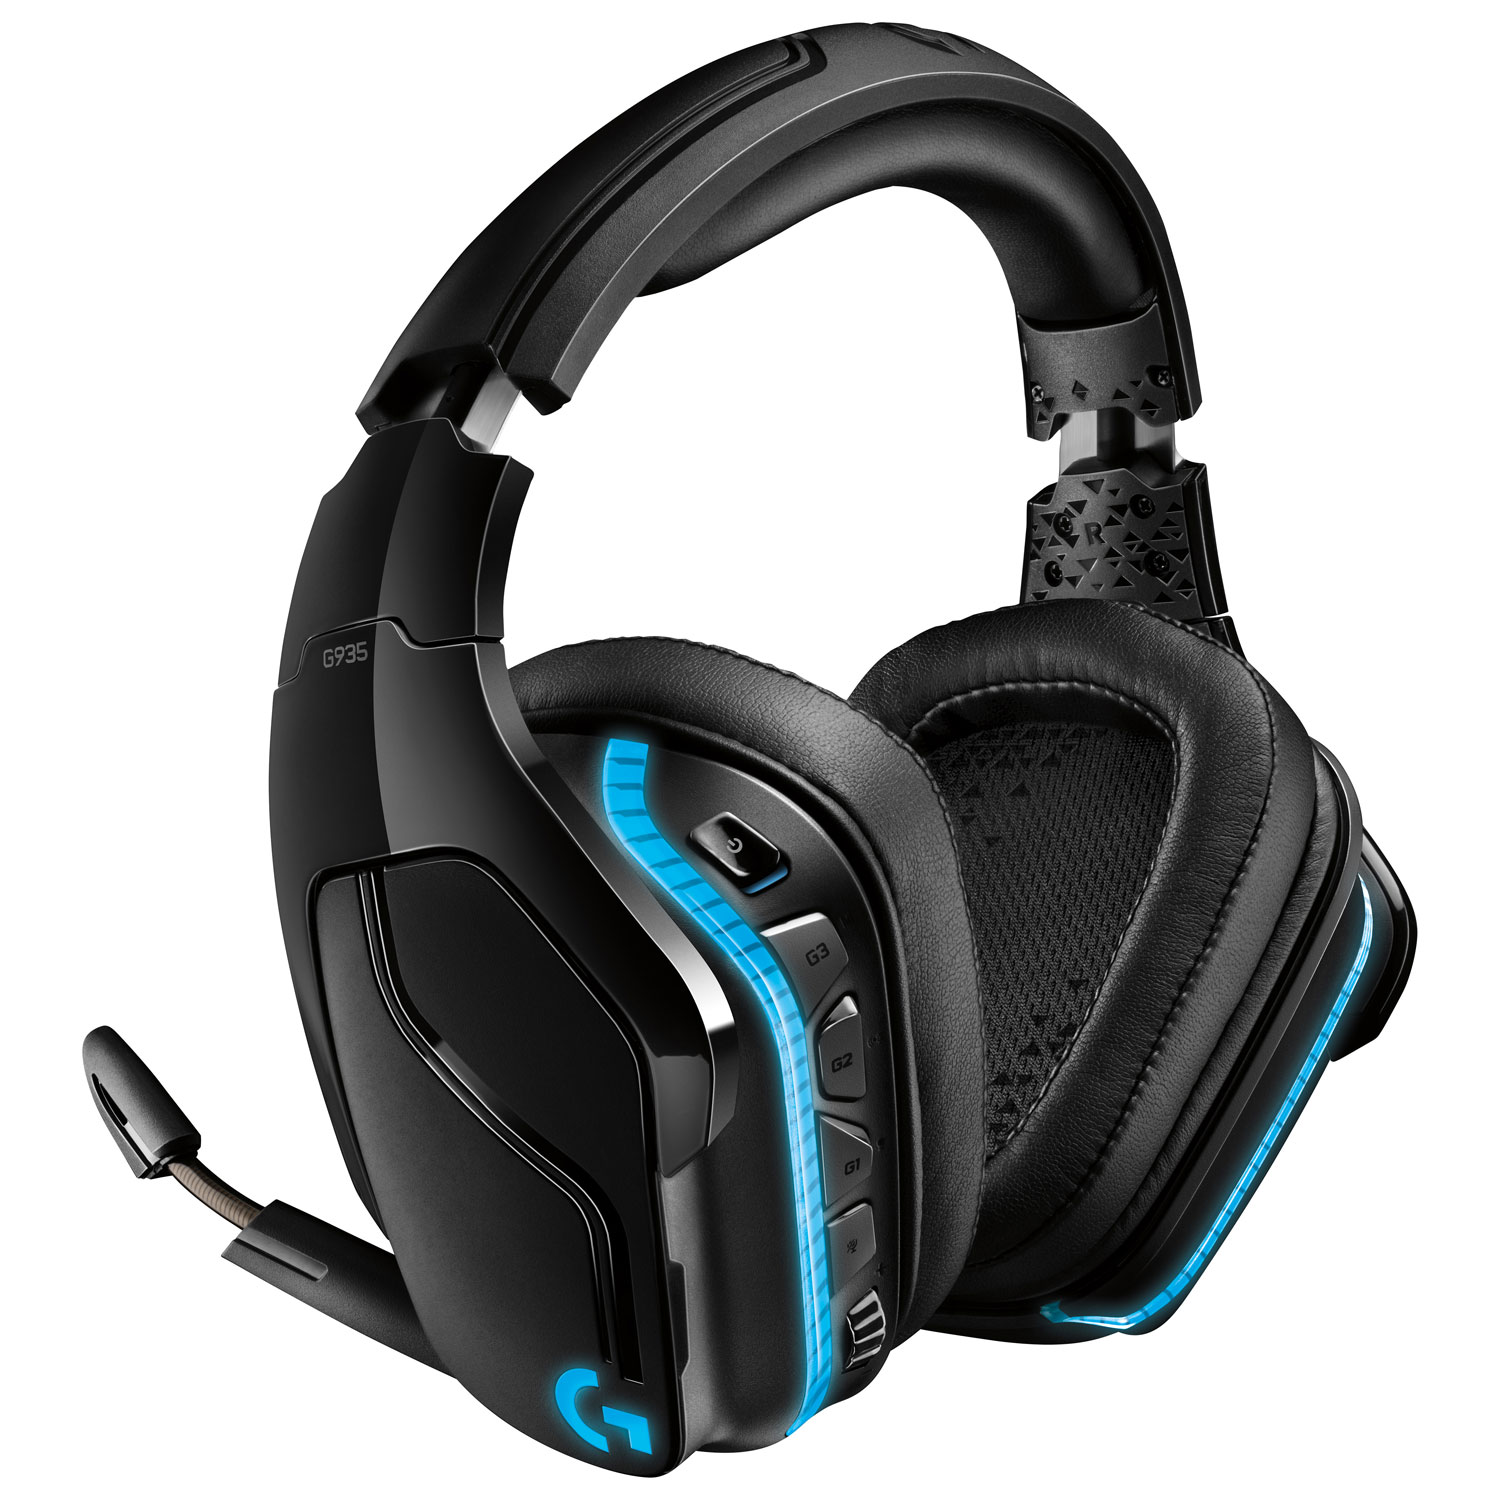 Enter this contest for your chance to win a Logitech gaming headset